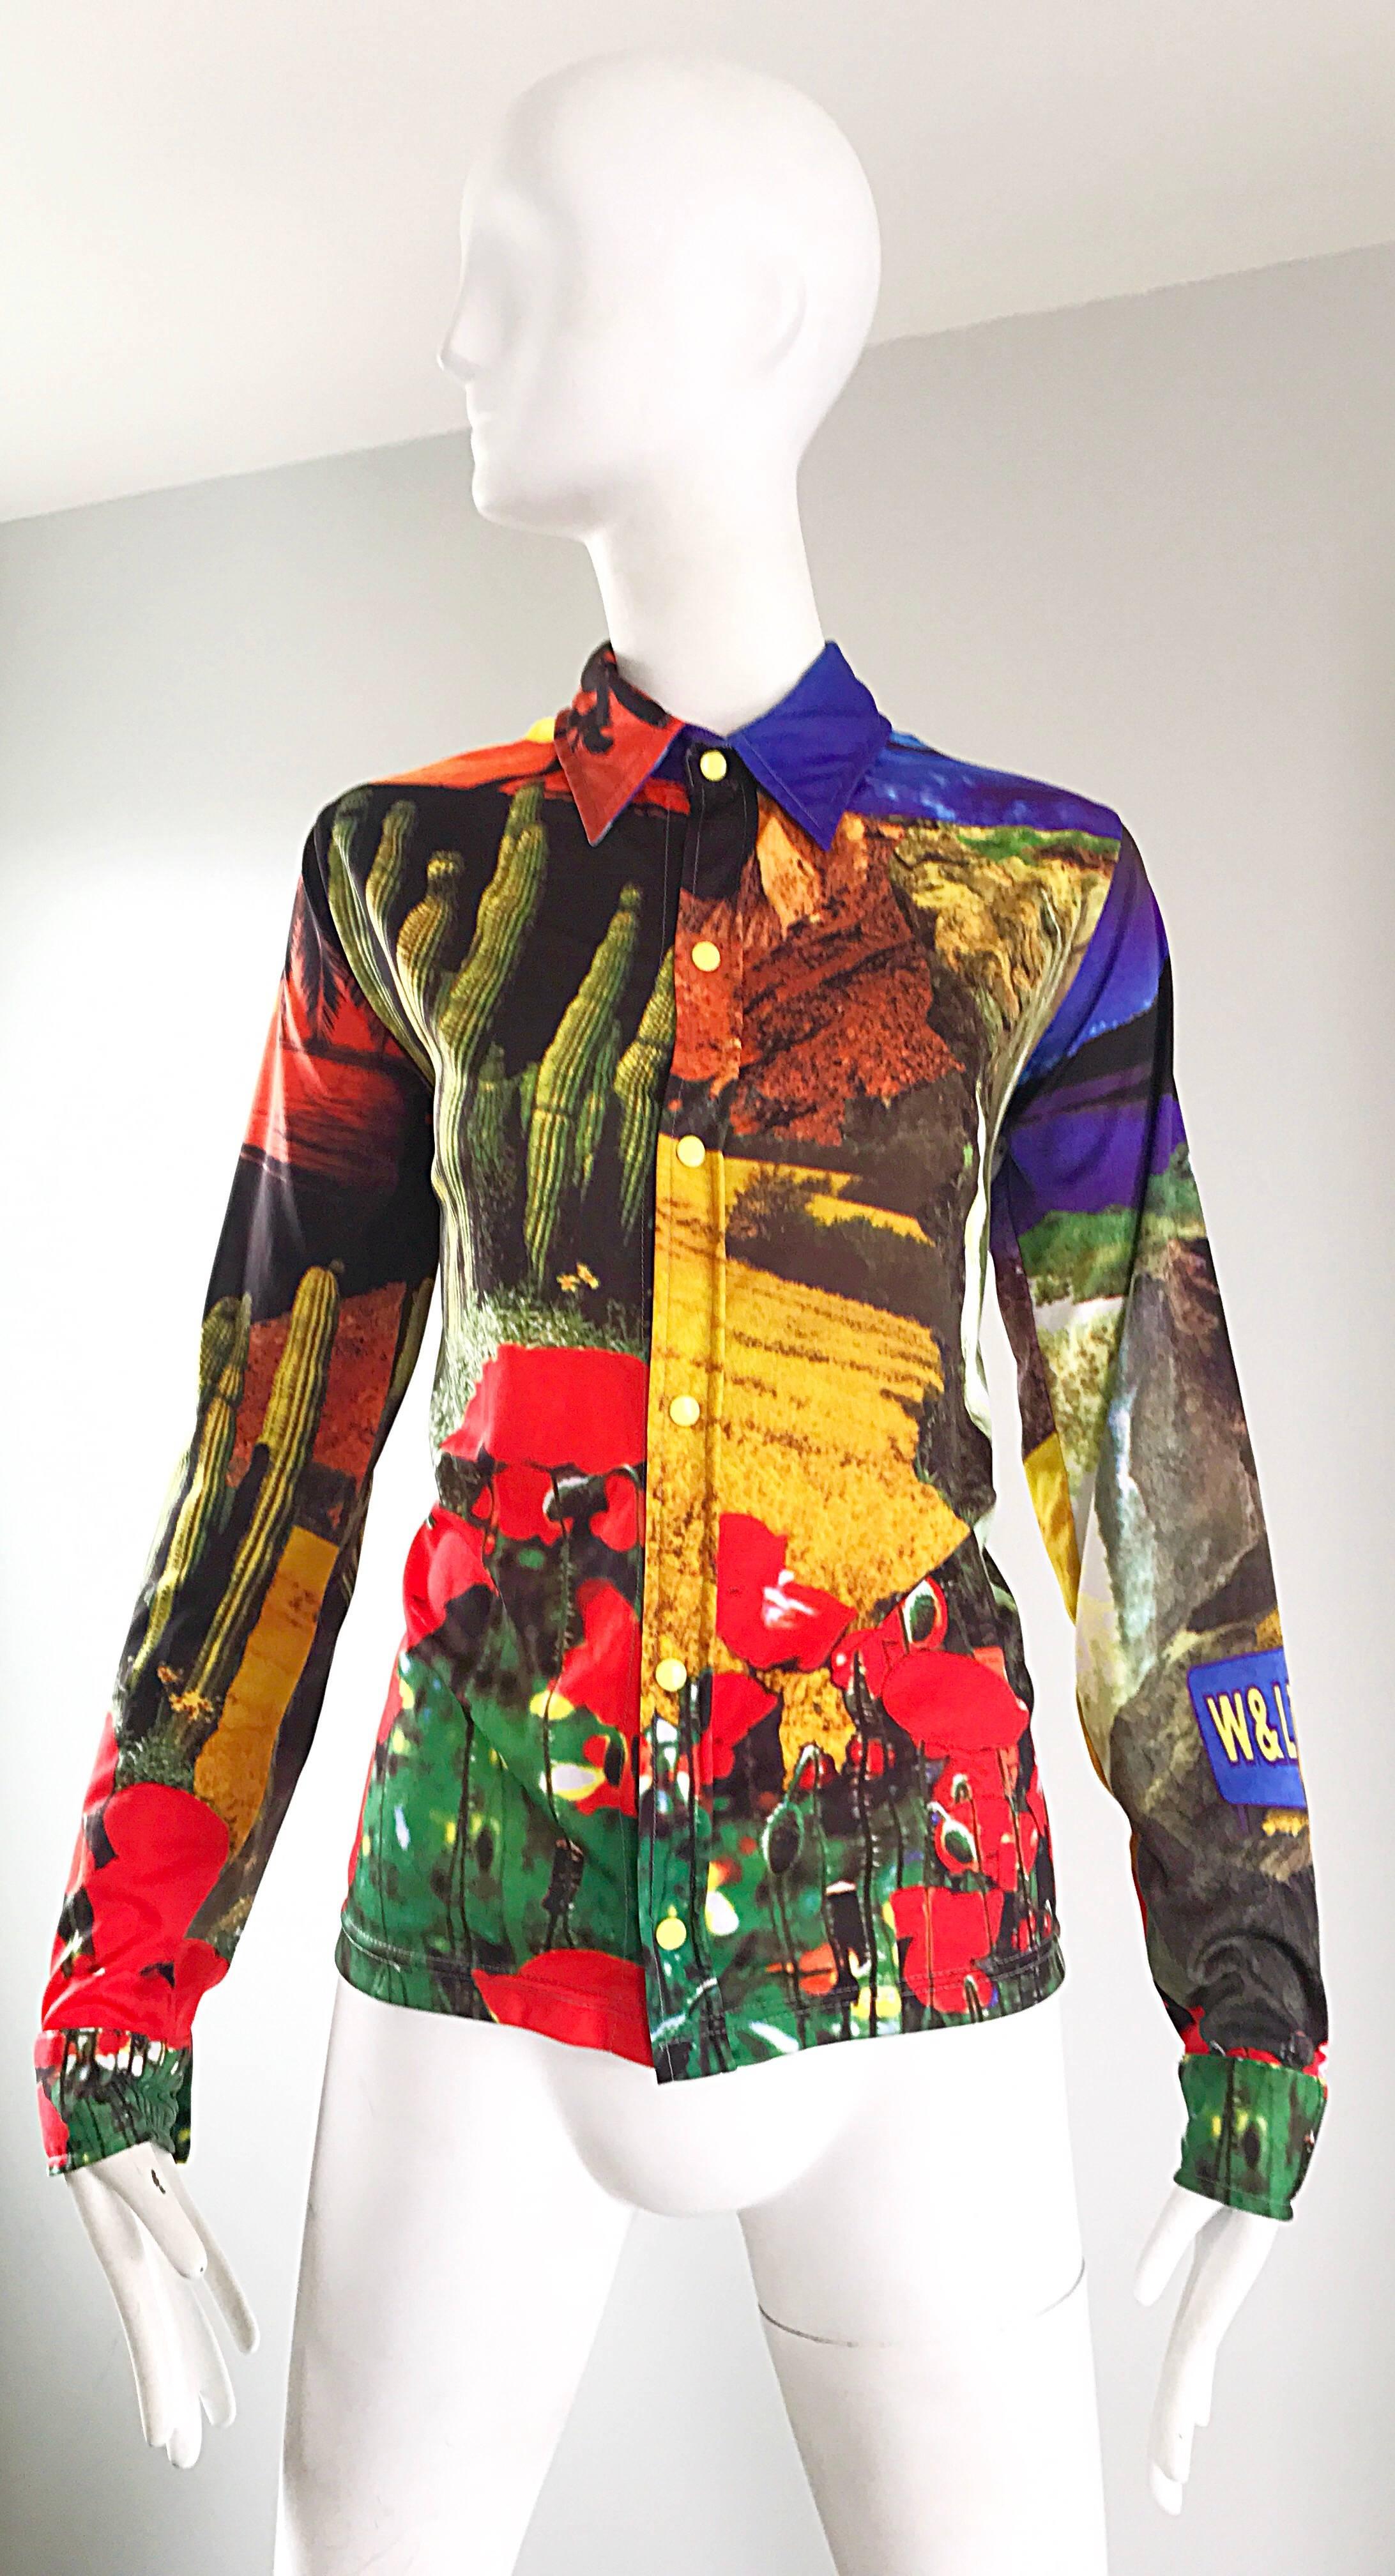 Amazing and super rare musueM piece WALTER VAN BEIRENDONCK unisex long sleeve shirt! Features a photo reel print, with flowers, the desert, freeways, mountains, and the W.&L.T. Logo ( Kiss the future! Wild and Lethal Trash ), etc. throughout.